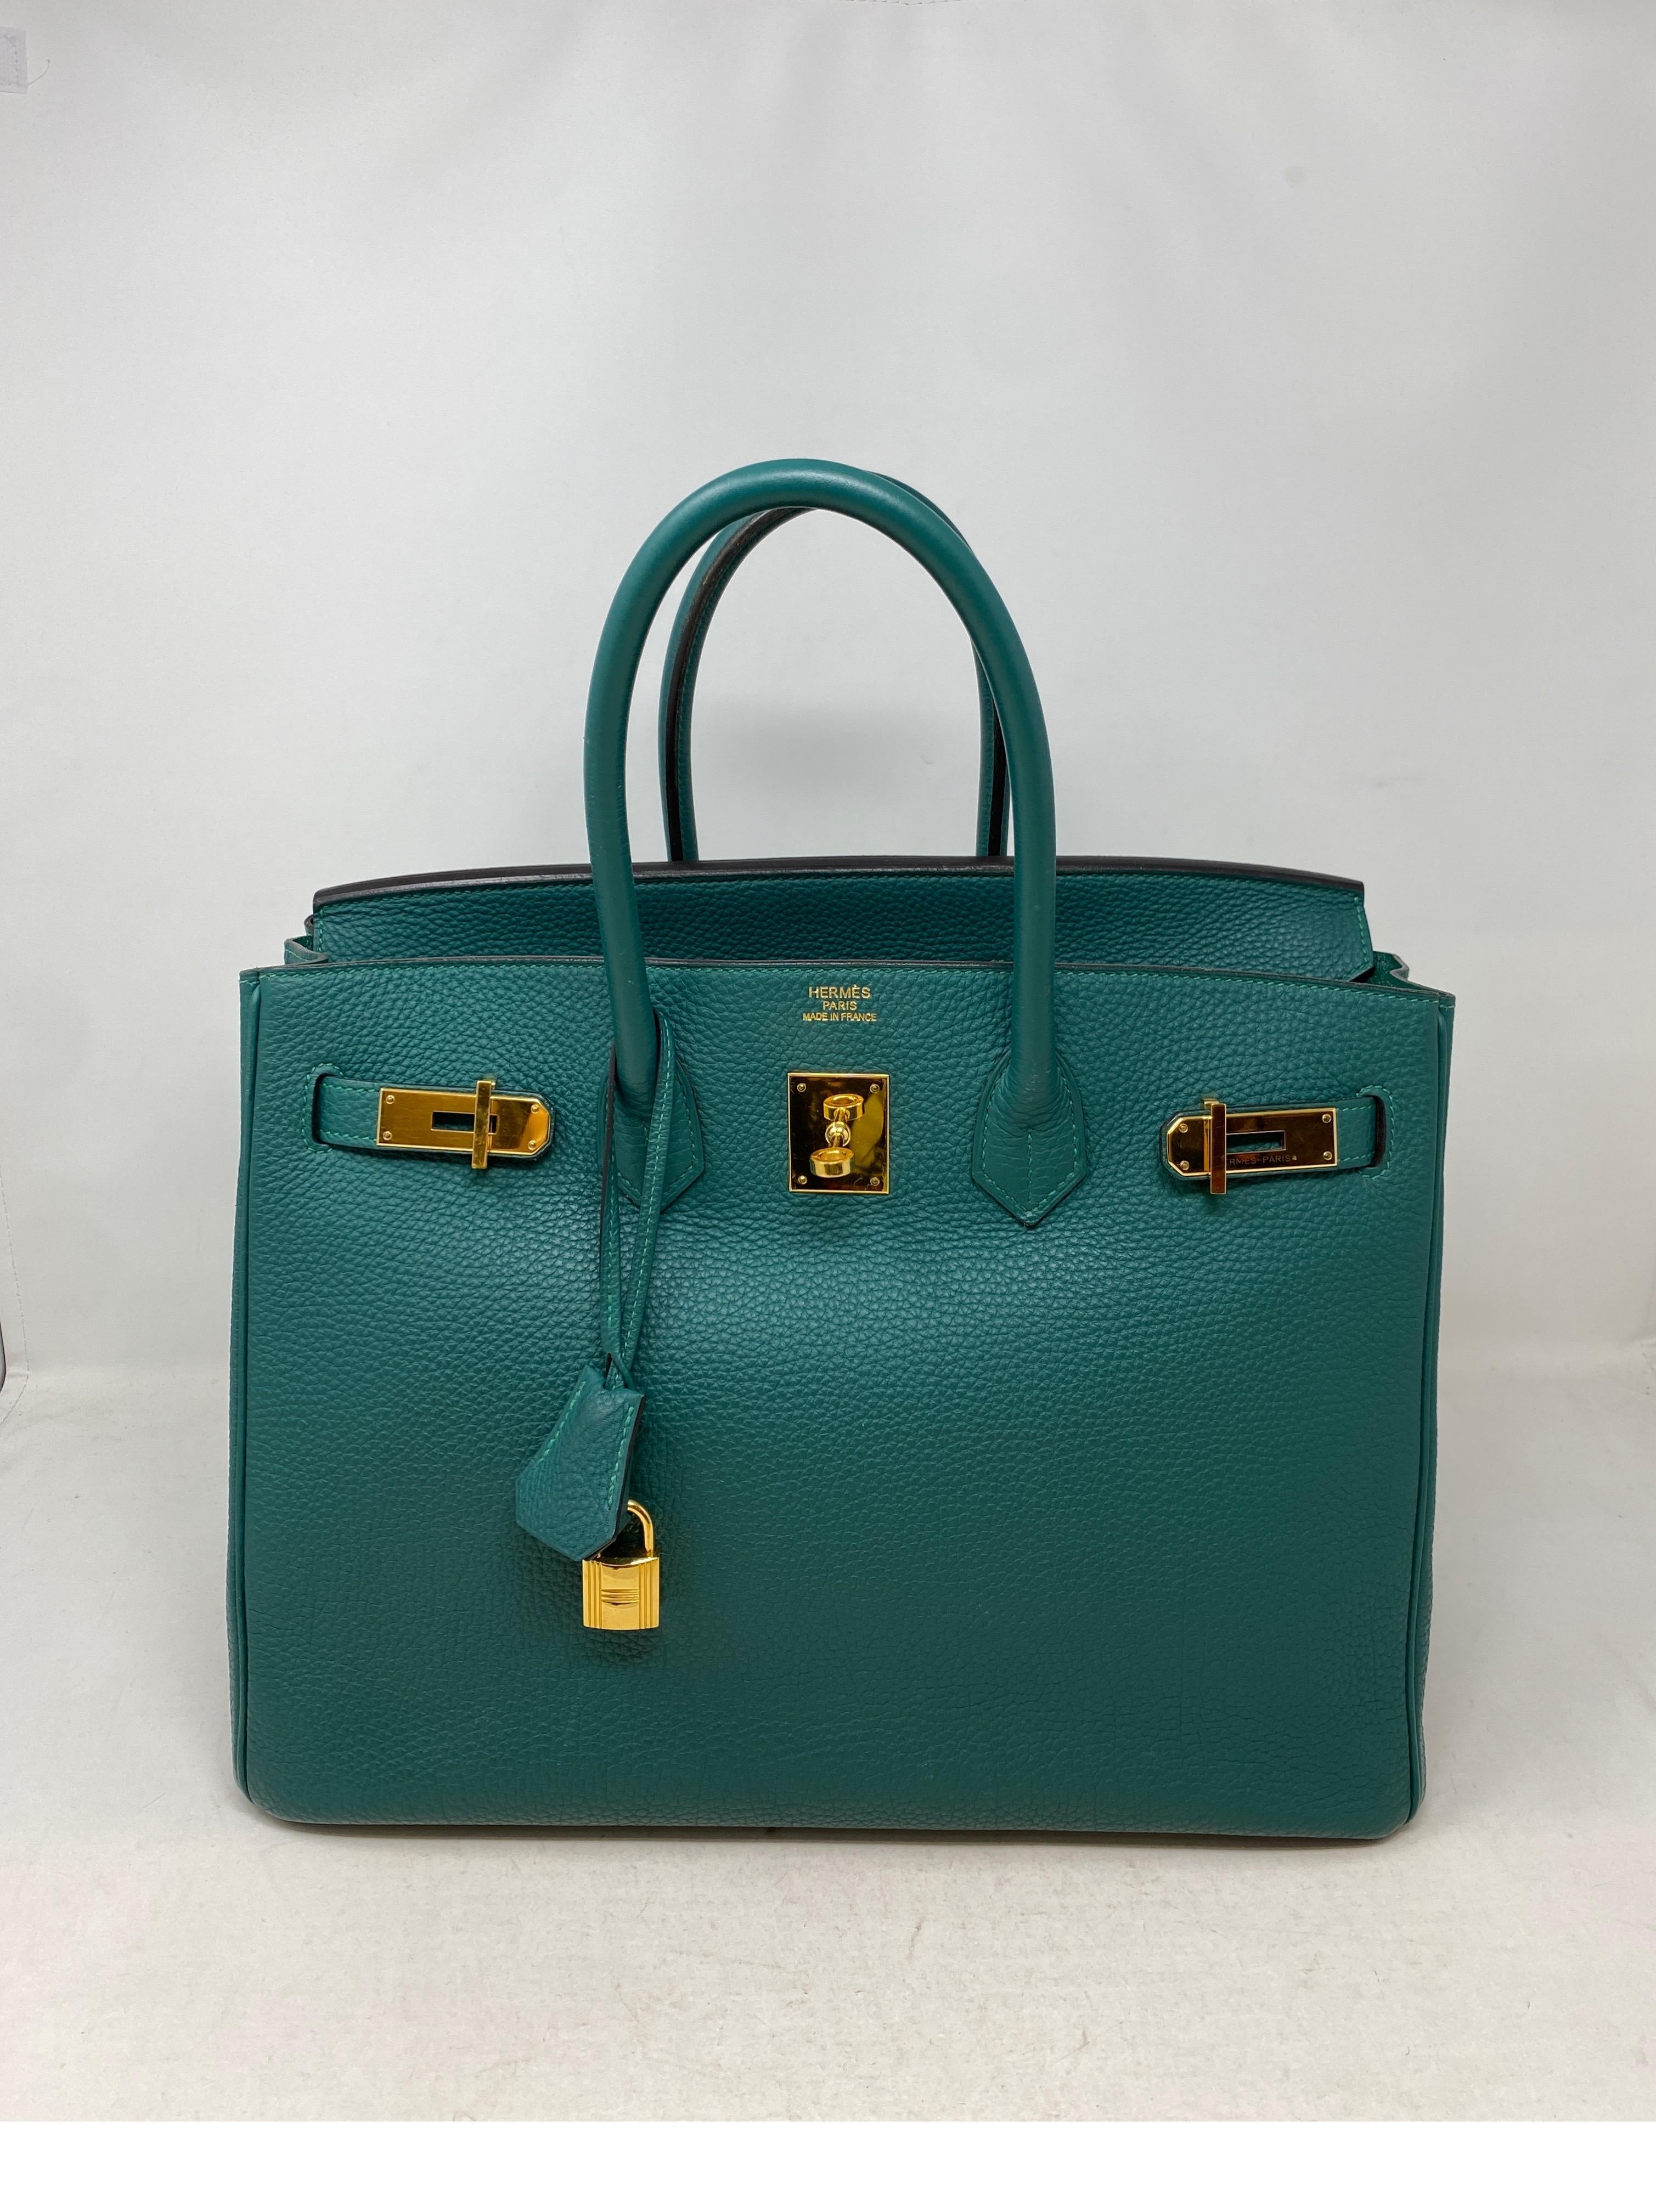 Hermes Malachite Birkin 35 Bag. Rare green color with gold hardware. Mint like new condition. Gold hardware. Togo leather. Includes clochette, lock, keys, and dust cover. Guaranteed authentic. 